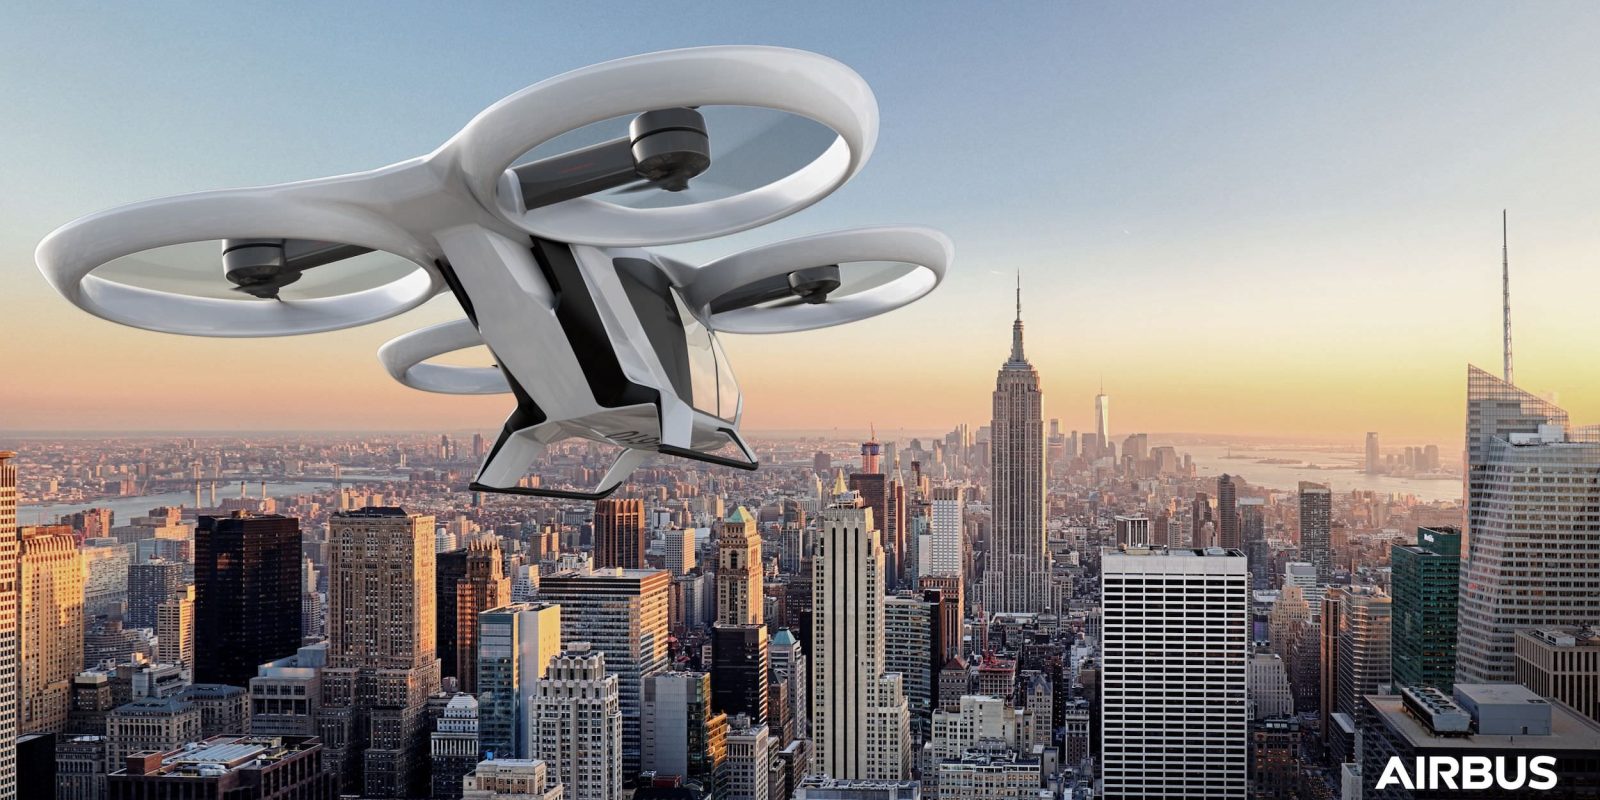 Flying taxi on track to make debut flight in 2018 according to Airbus